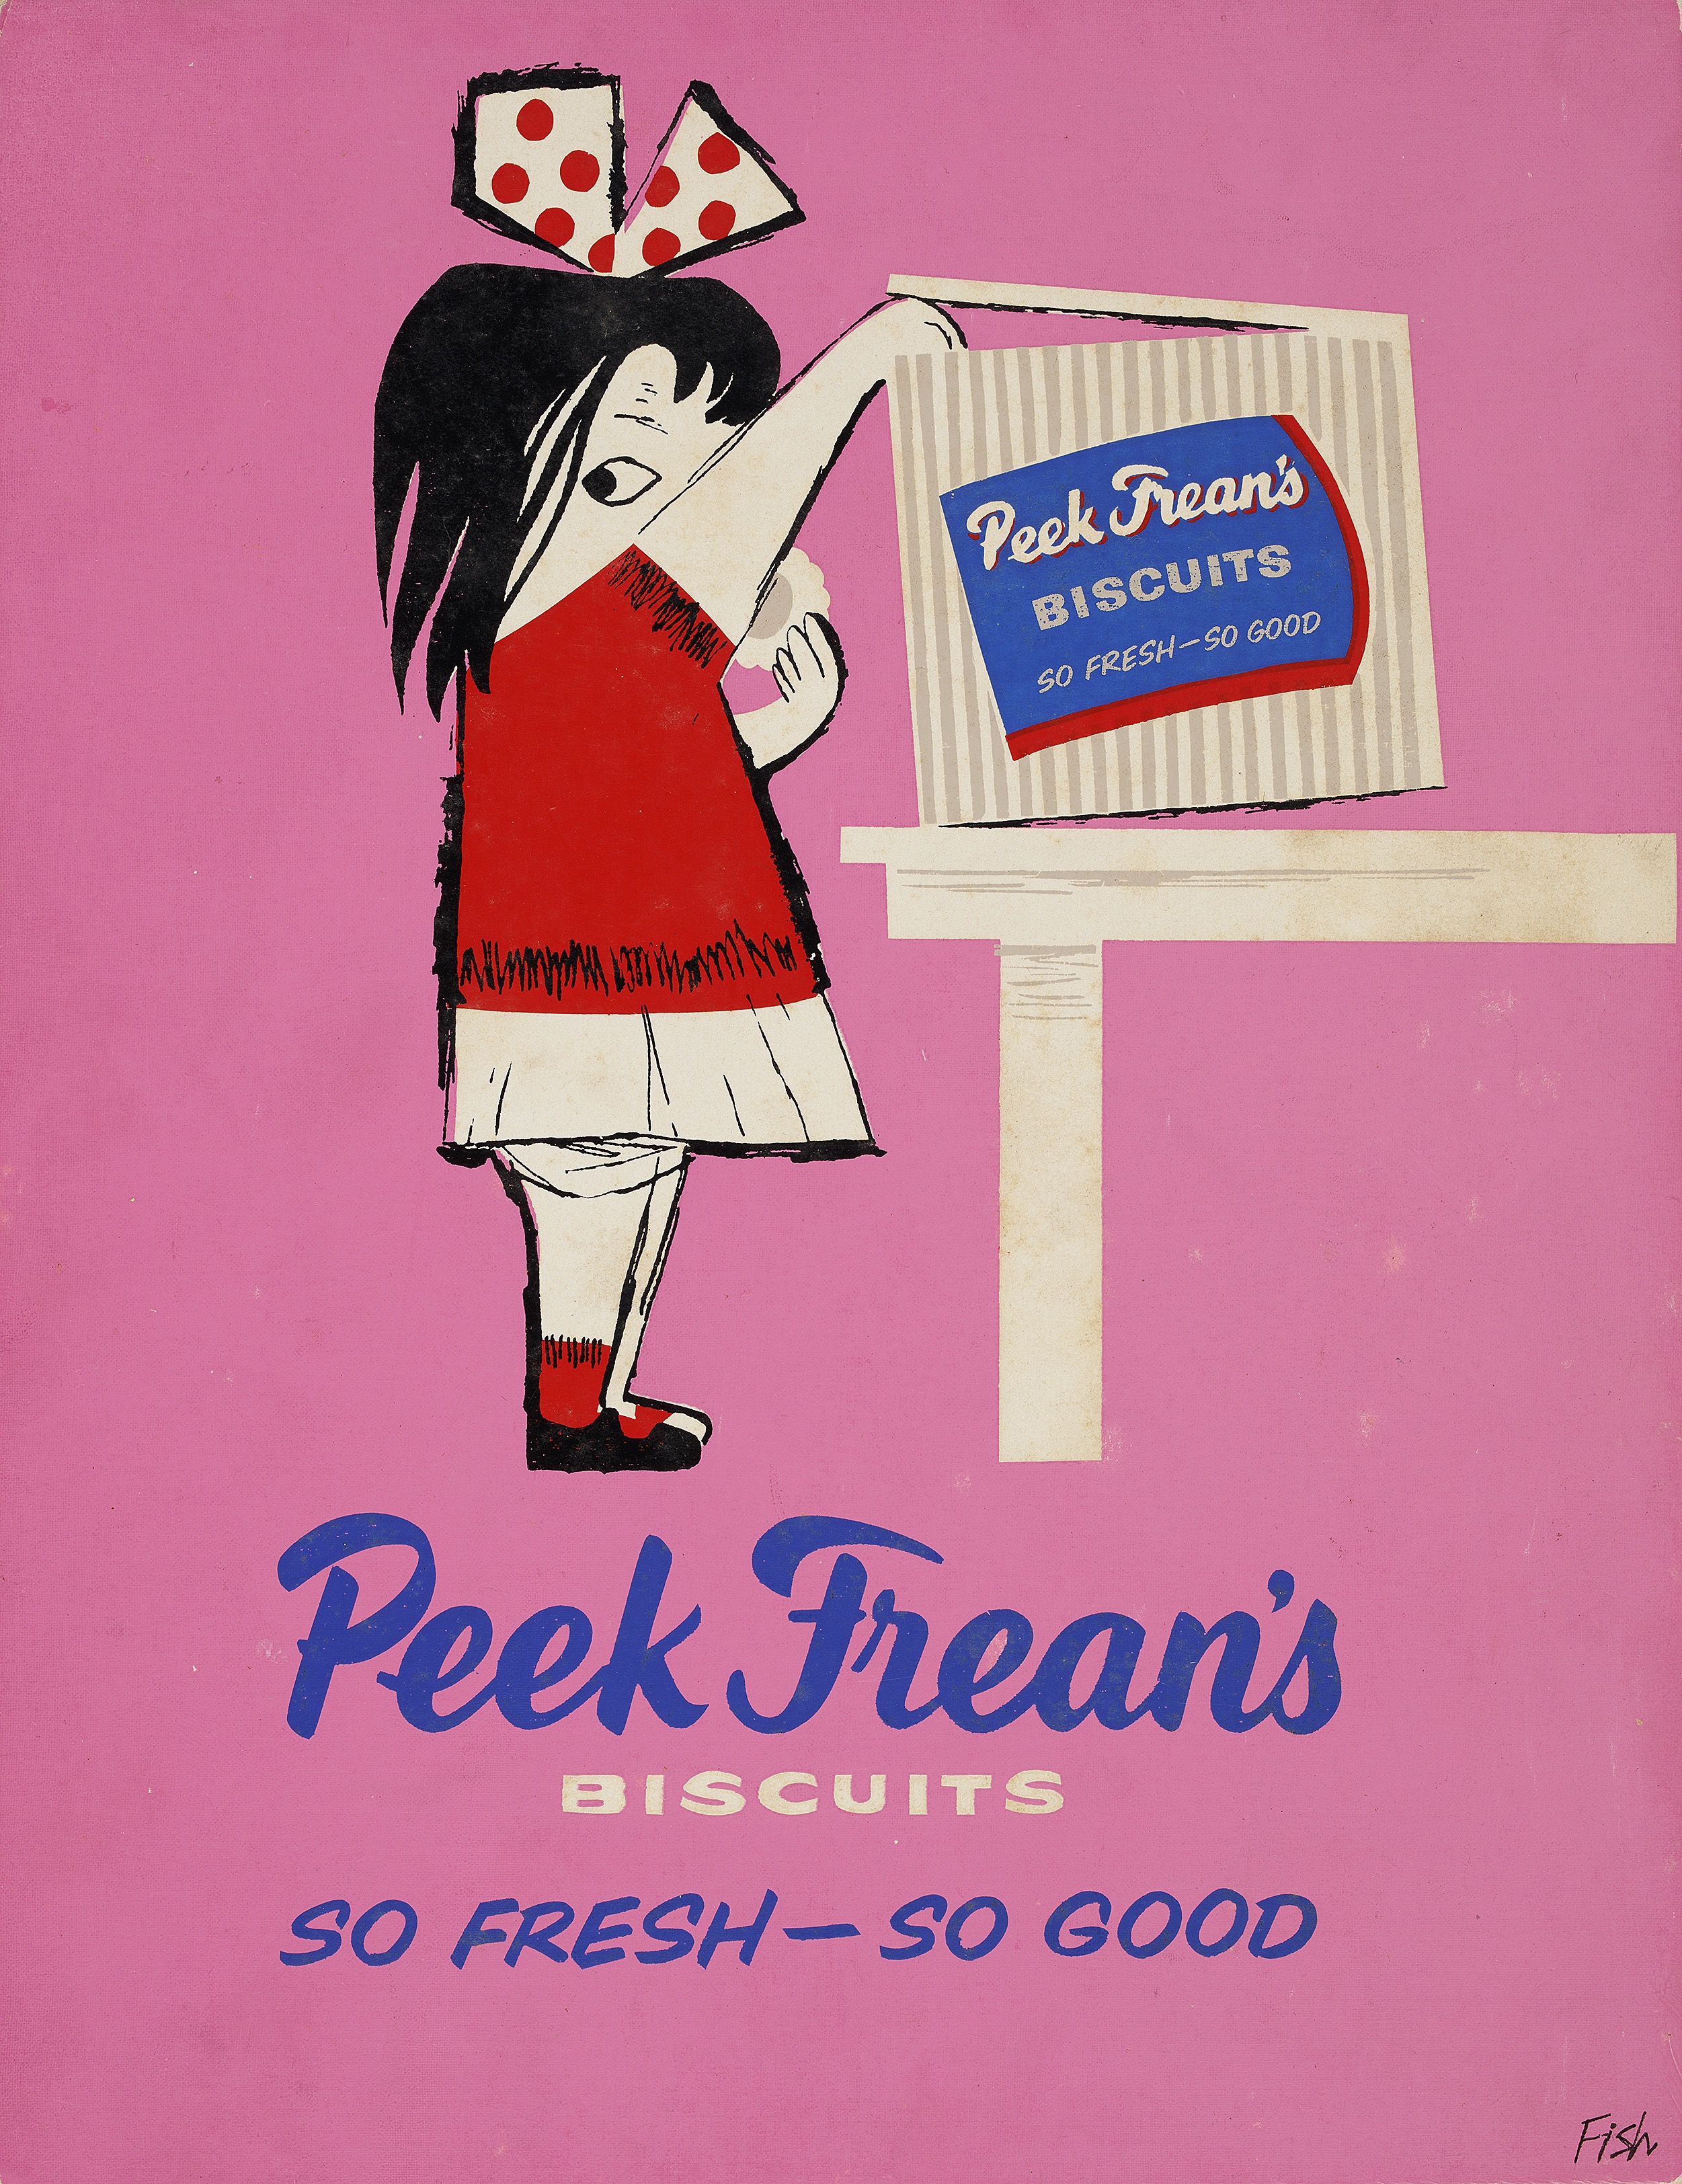 ‘Myrtle’, the little girl with her hand in the Peek Frean’s biscuit box